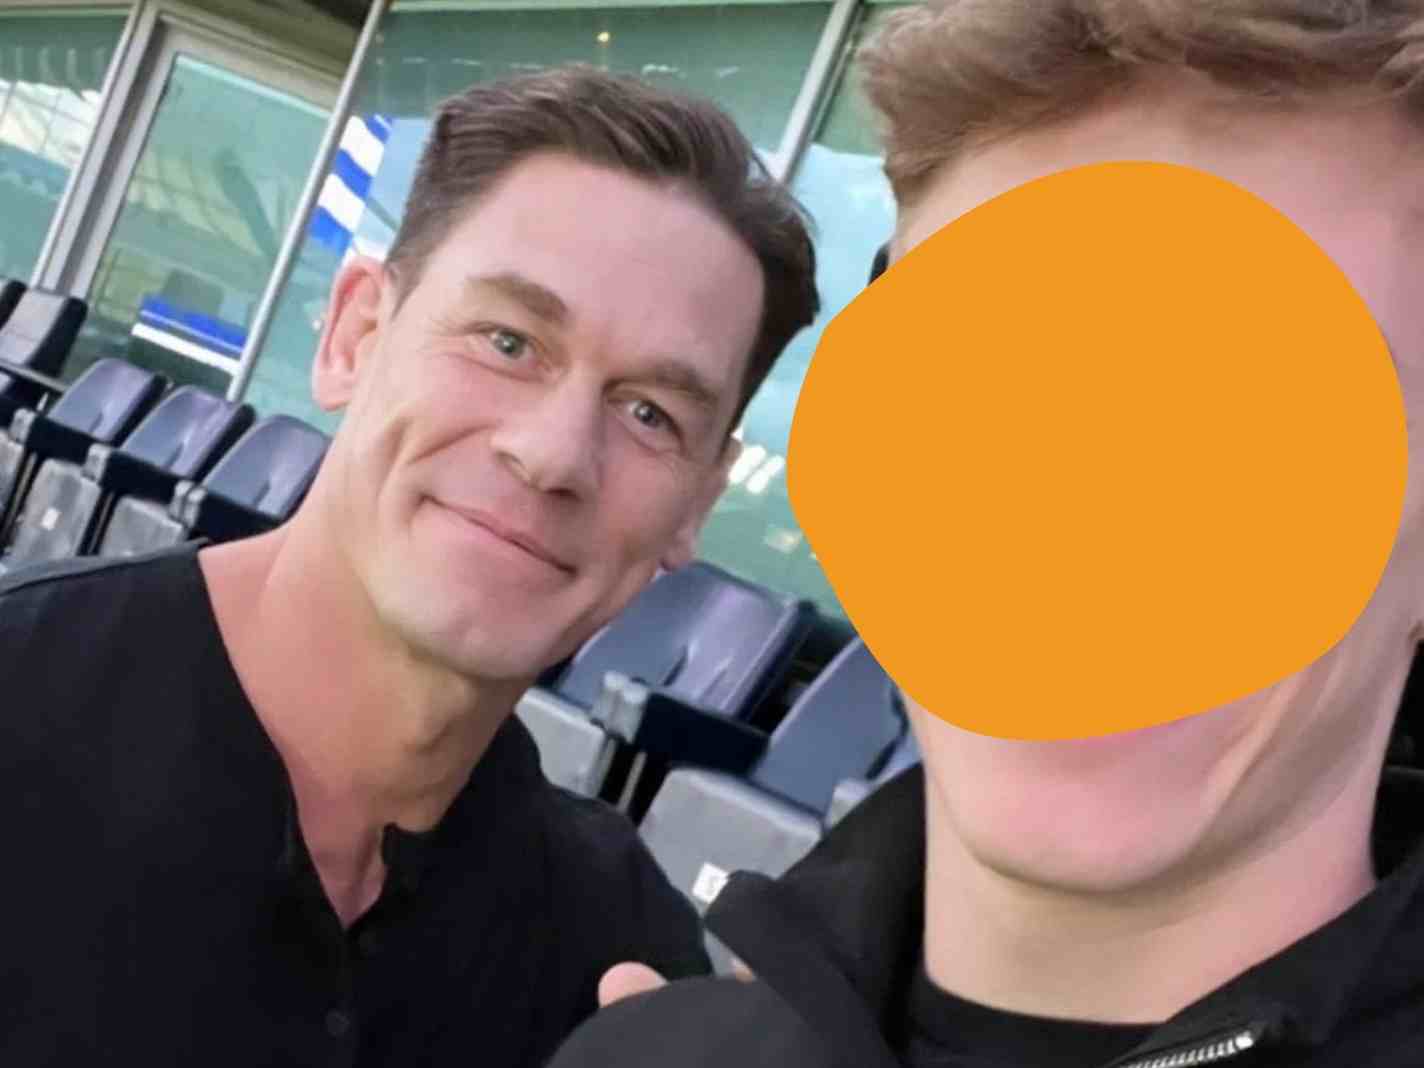 The photo shows John Cena at Stamford Bridge along with a fan.